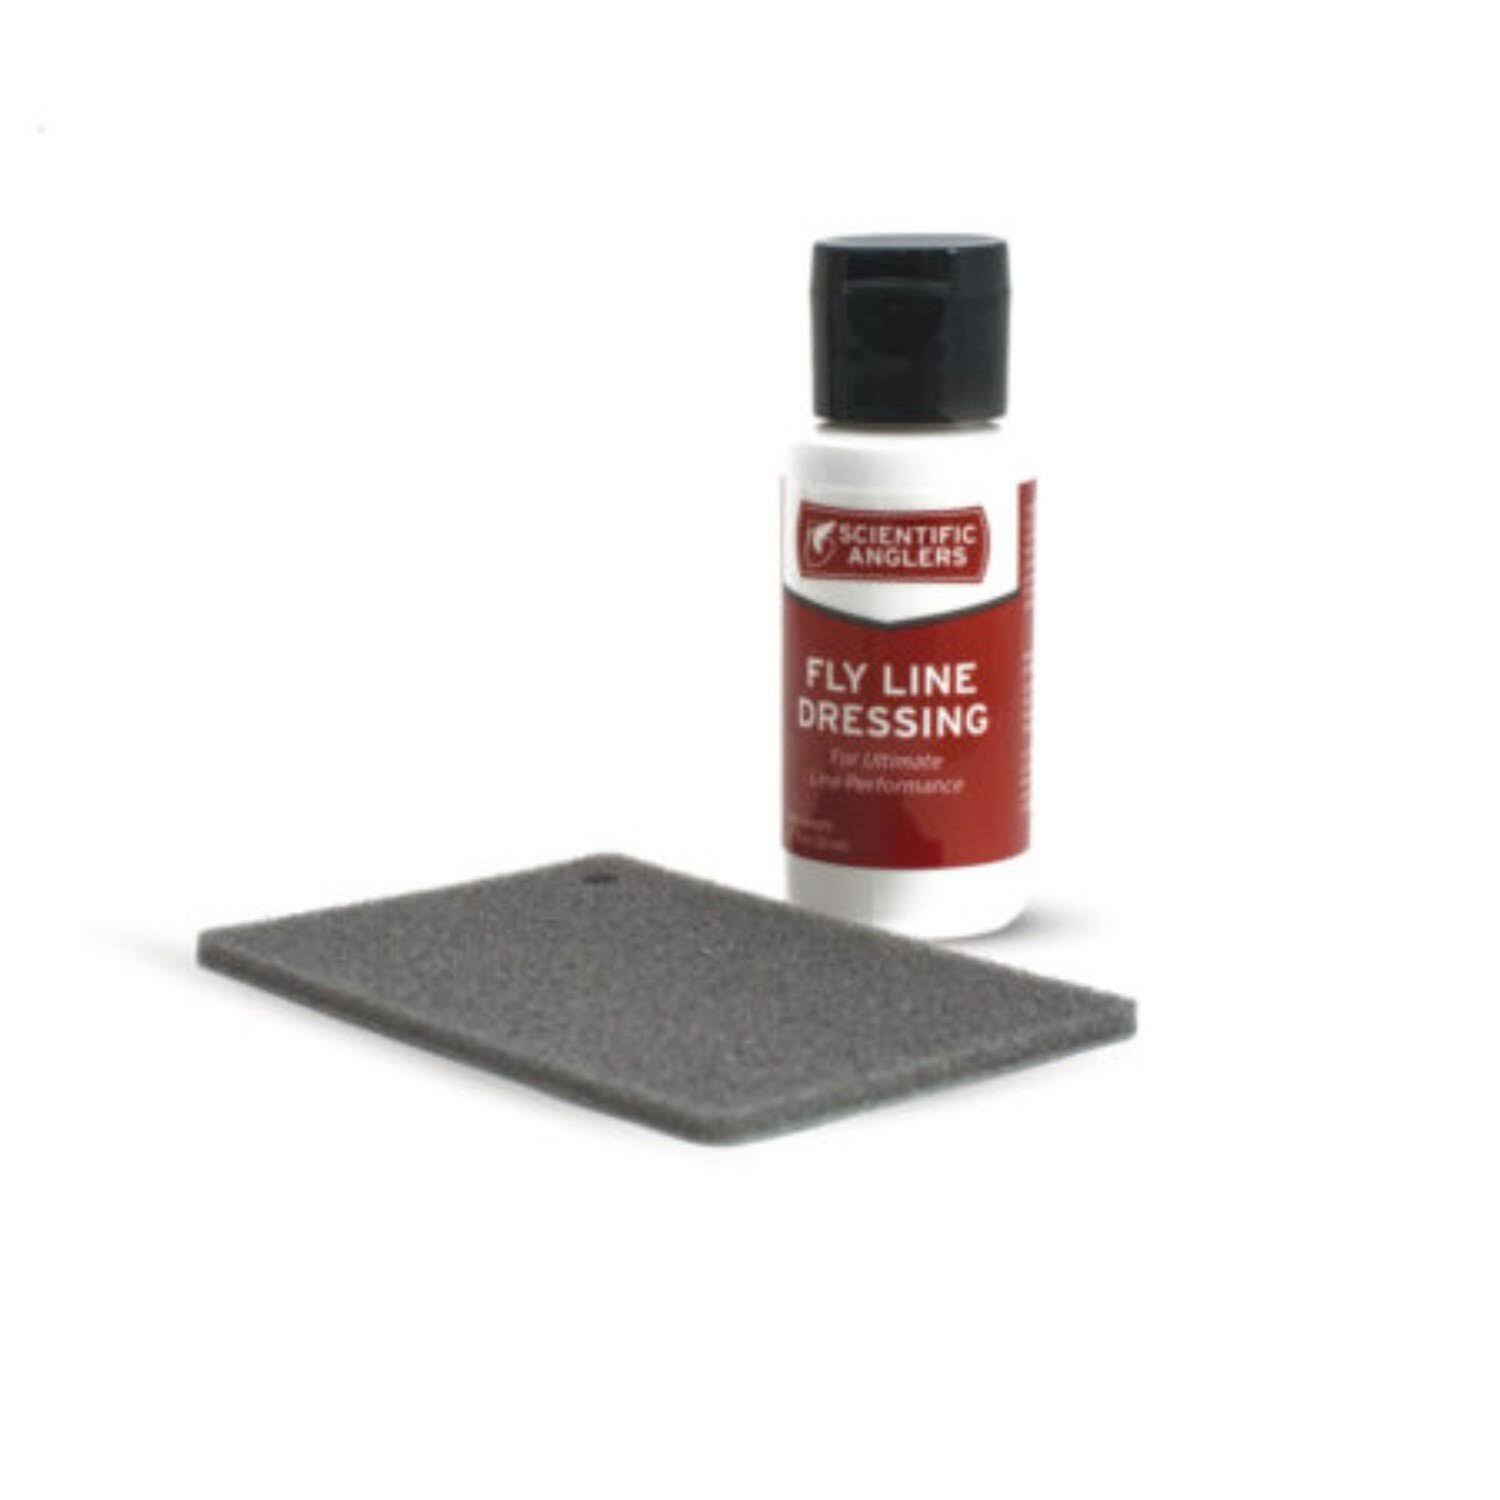 Scientific Anglers Fly Line Dressing Cleaner - 33ml, with Cleaning Pad